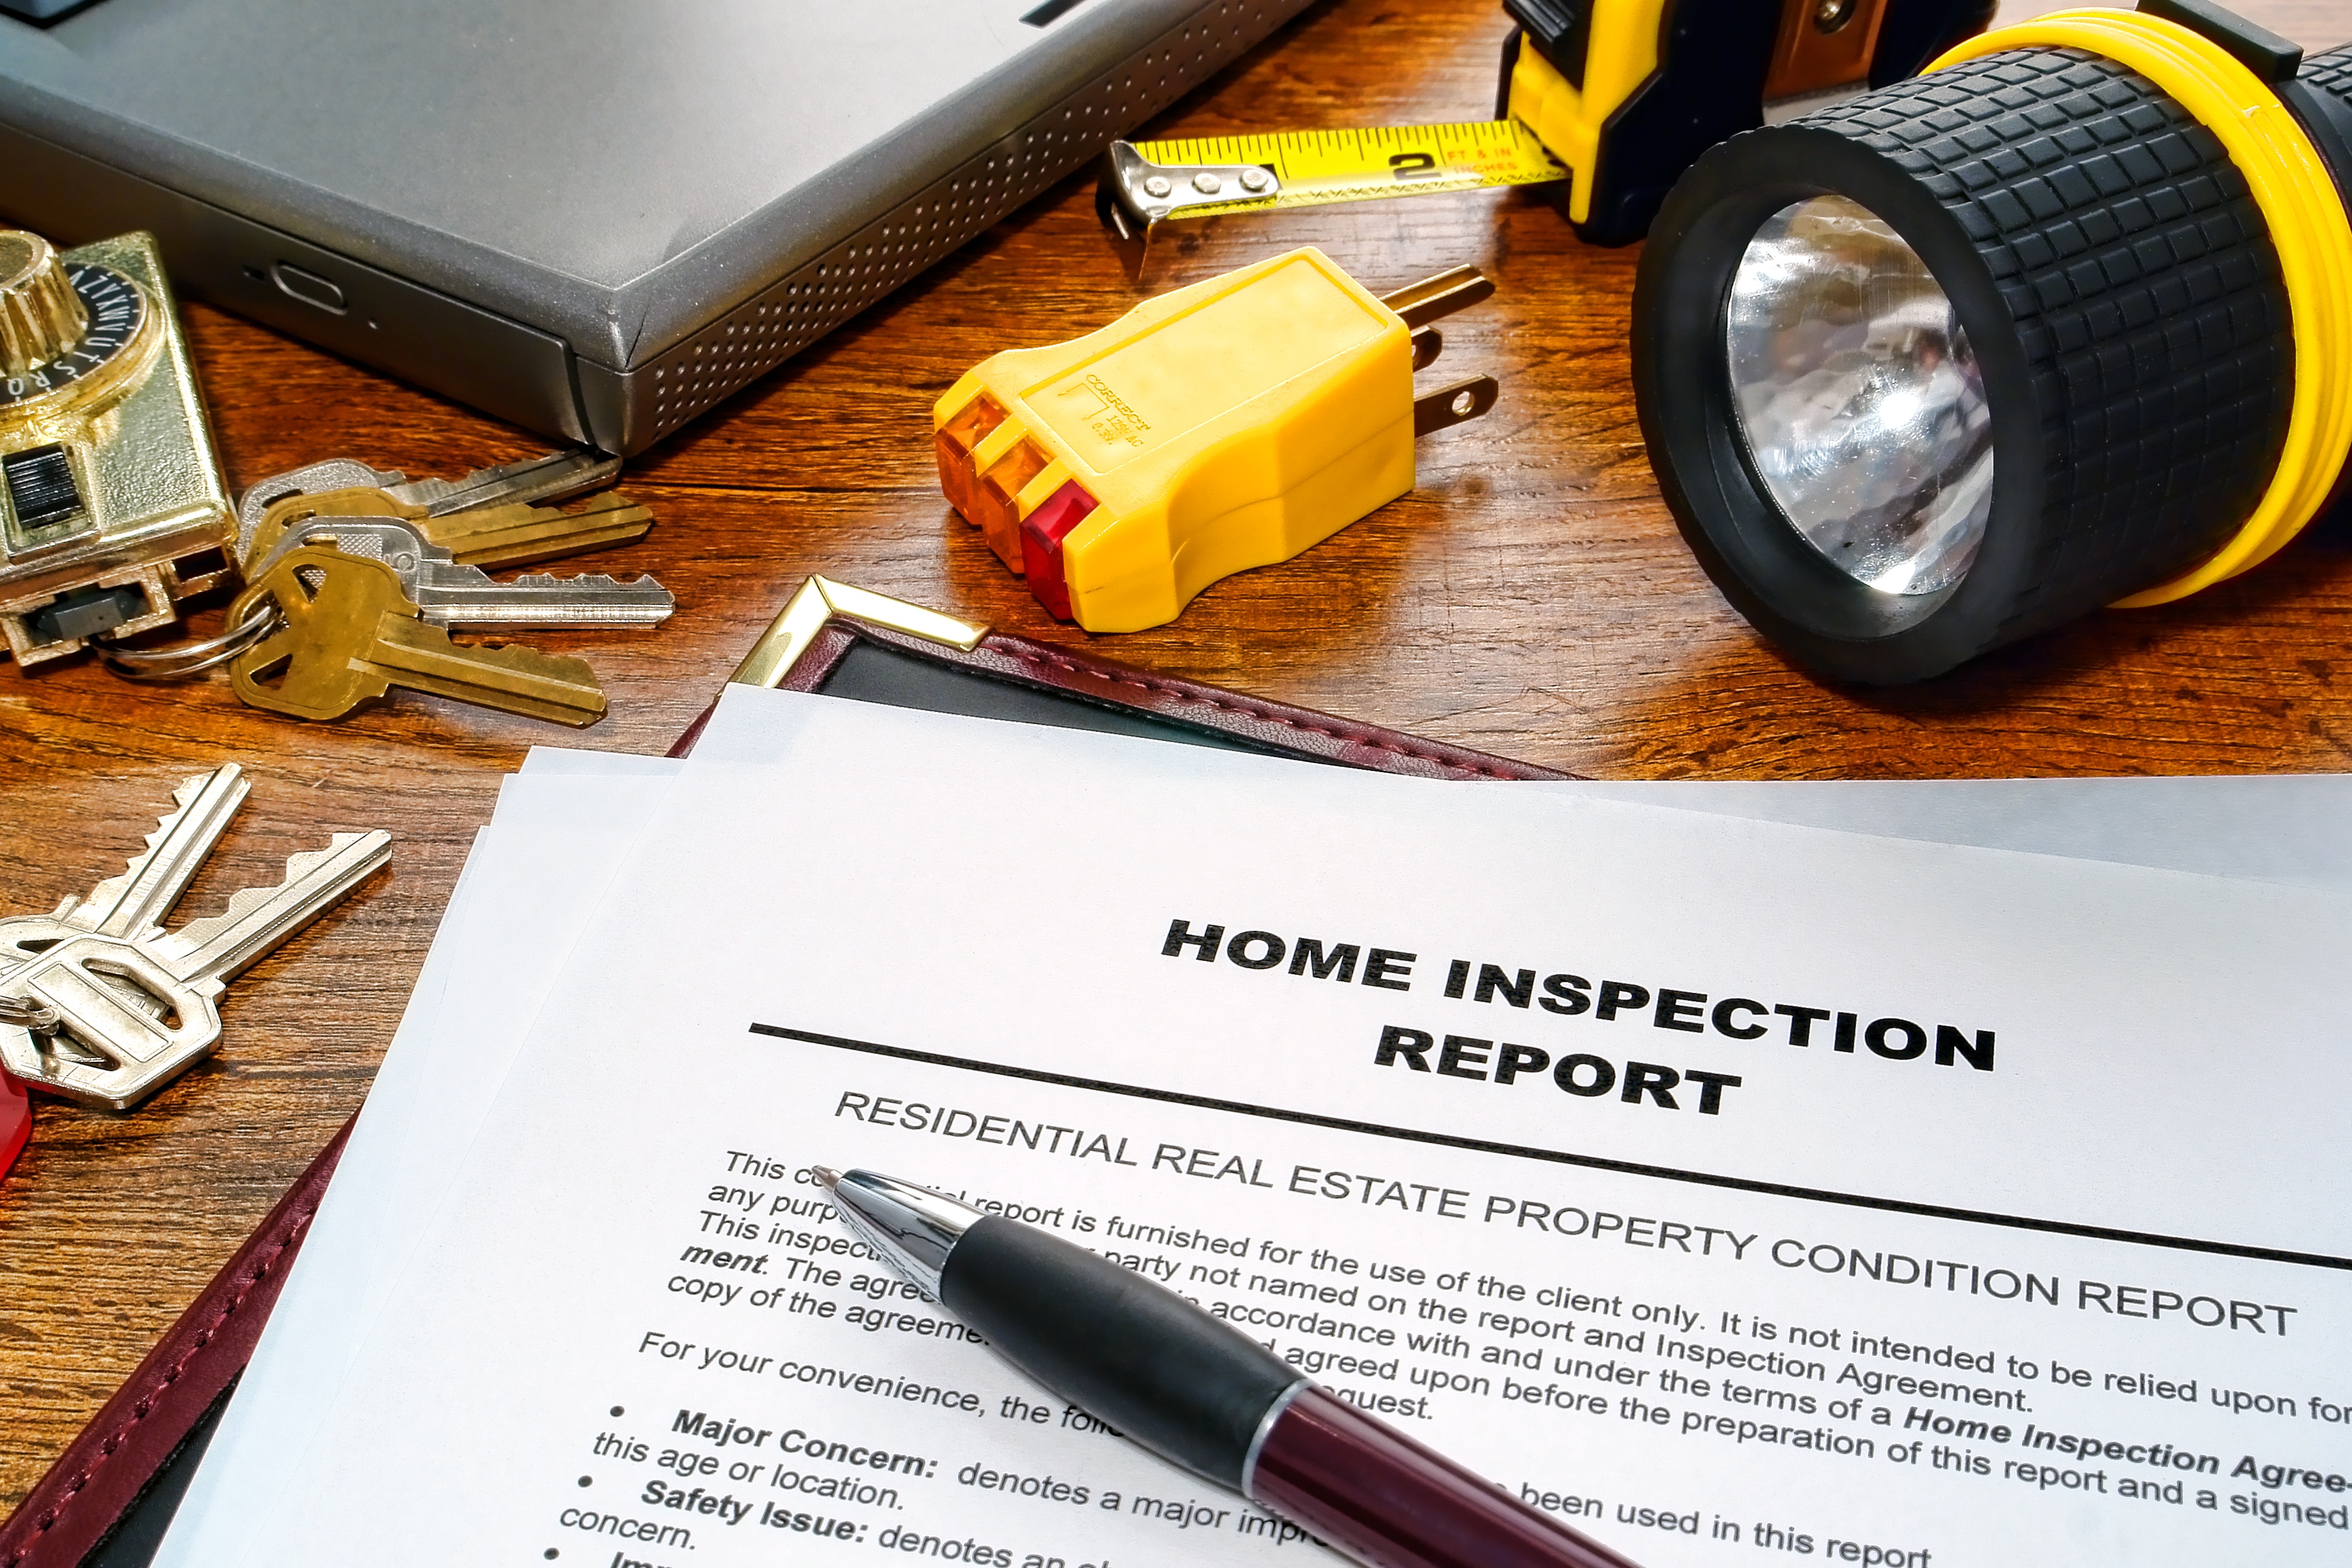 How to address Home Inspection Concerns